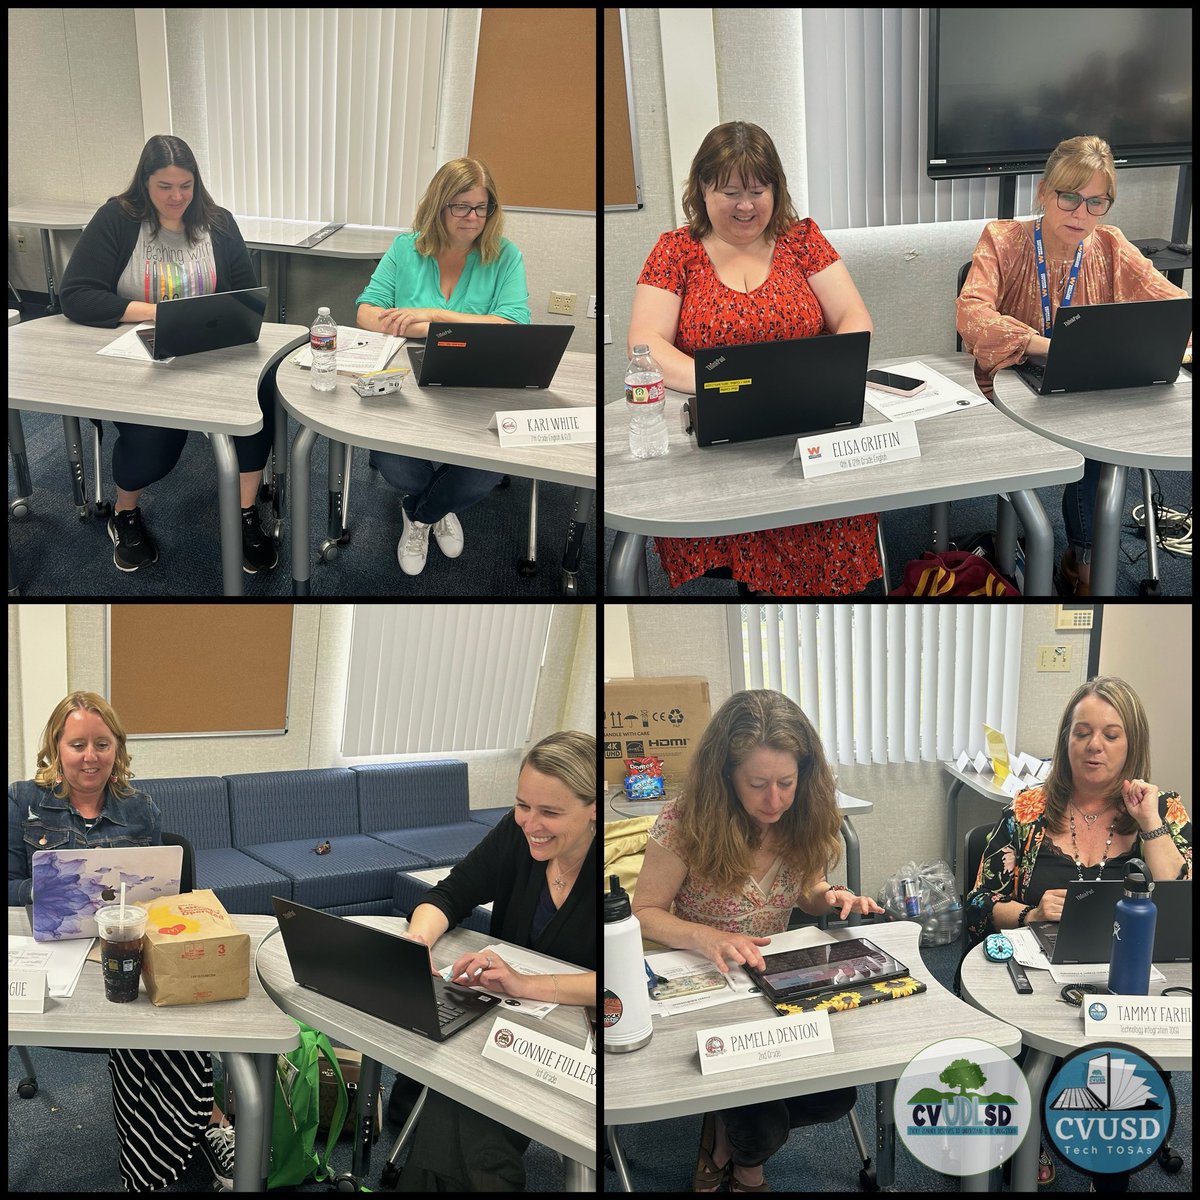 Our @ConejoValleyUSD EduProtocols Pioneers come together each month to “Teach Better, Work Less, and Achieve More”. These educators are passionate about engaging students in meaningful learning experiences that give immediate feedback, tech integration, deeper learning, and FUN!